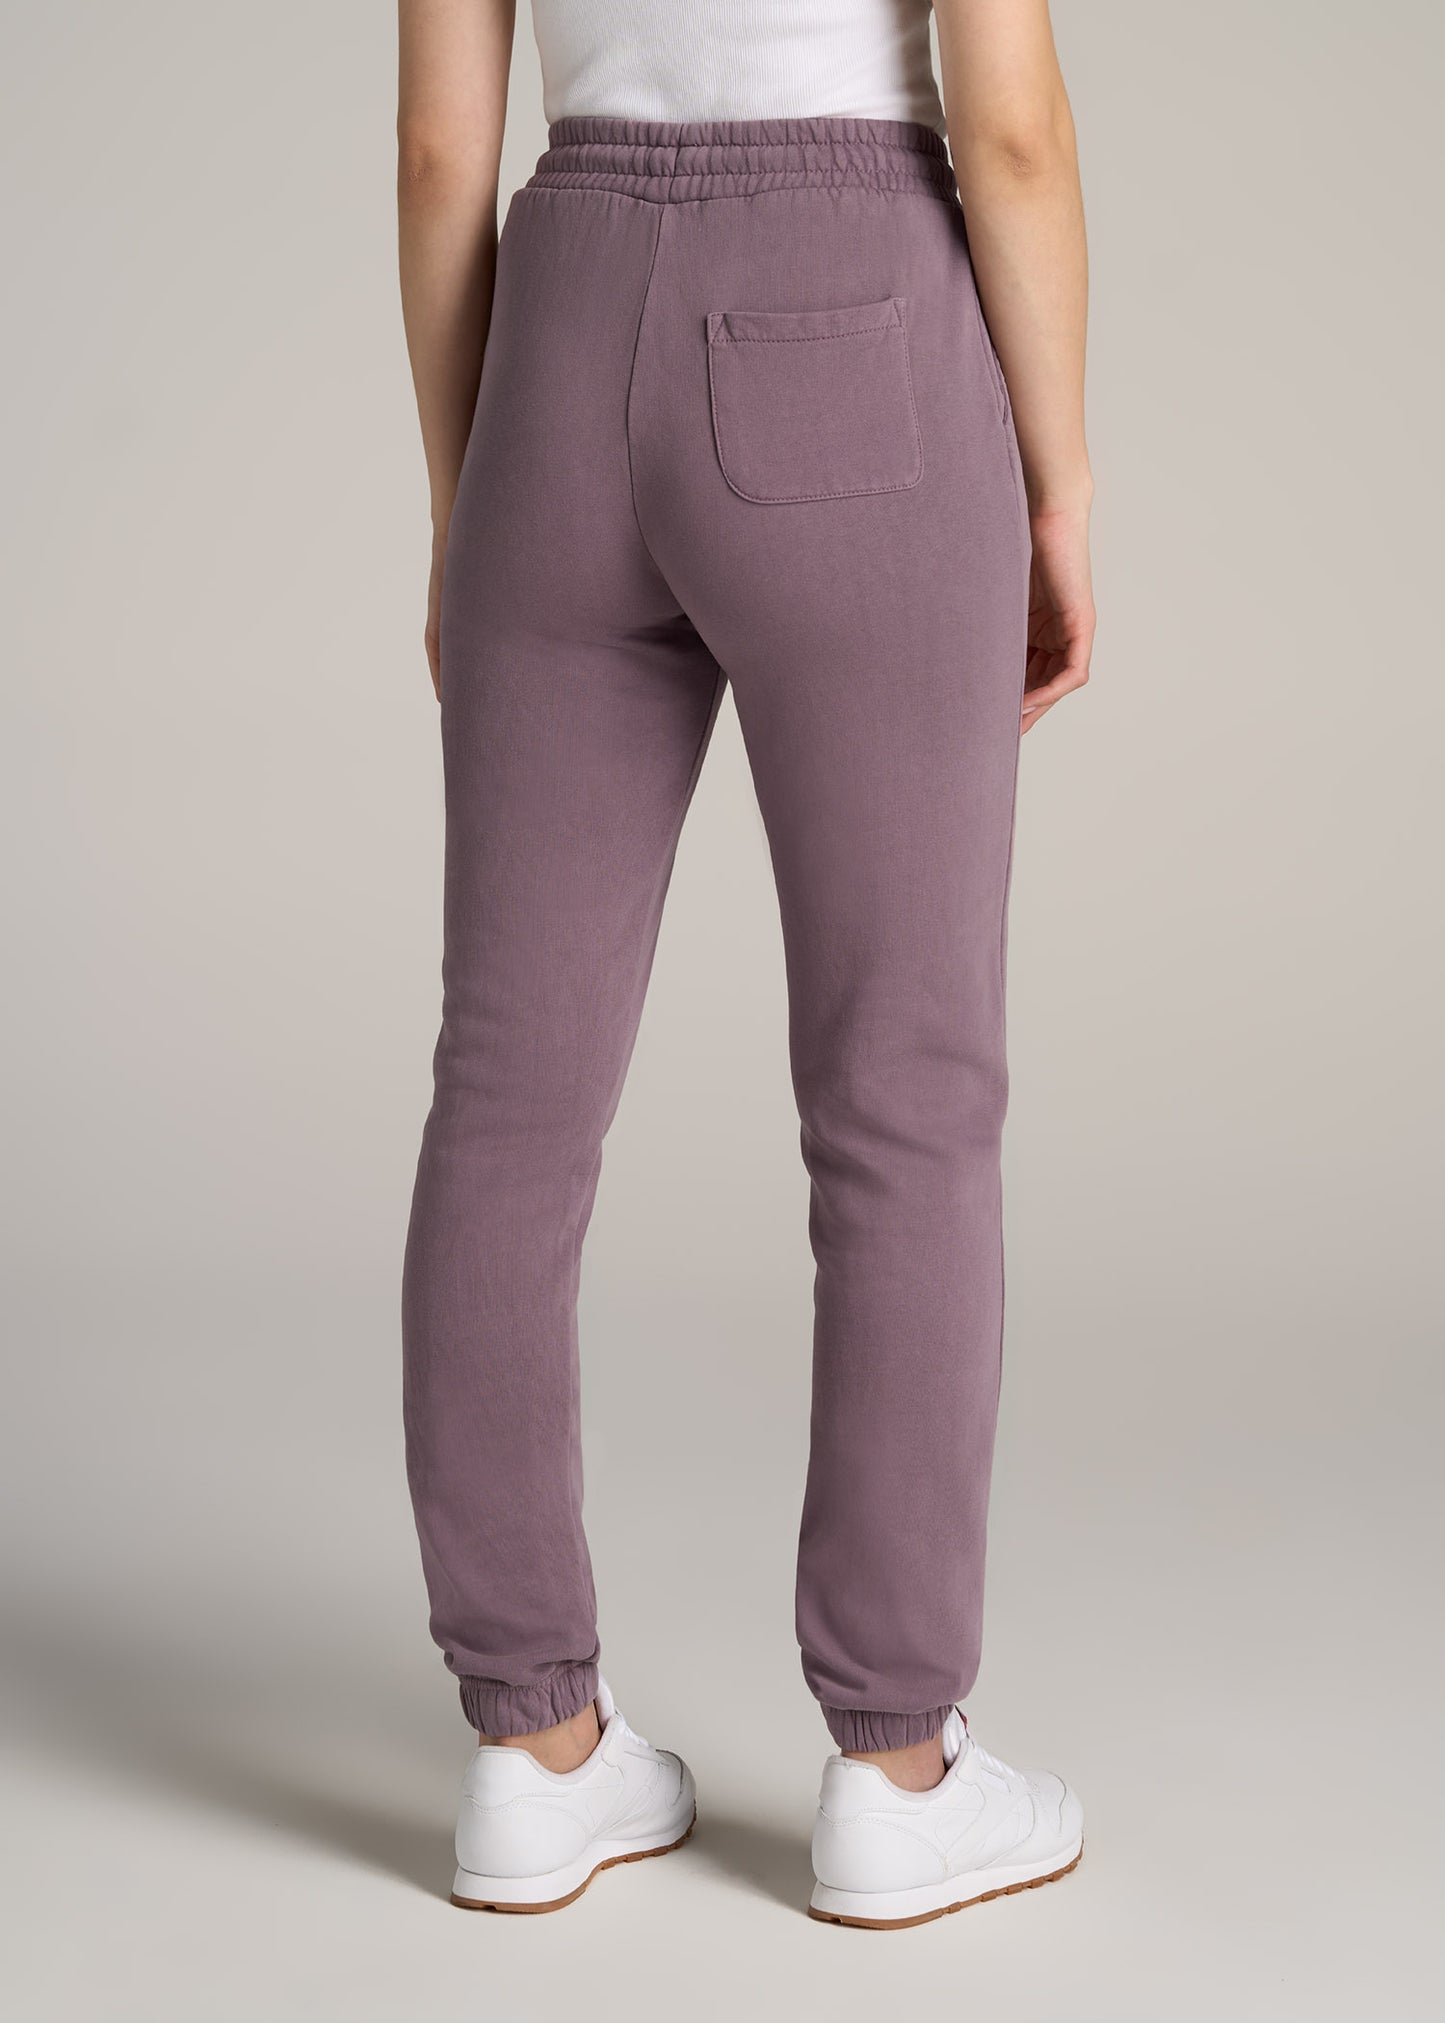  Sweatpants For Tall Women